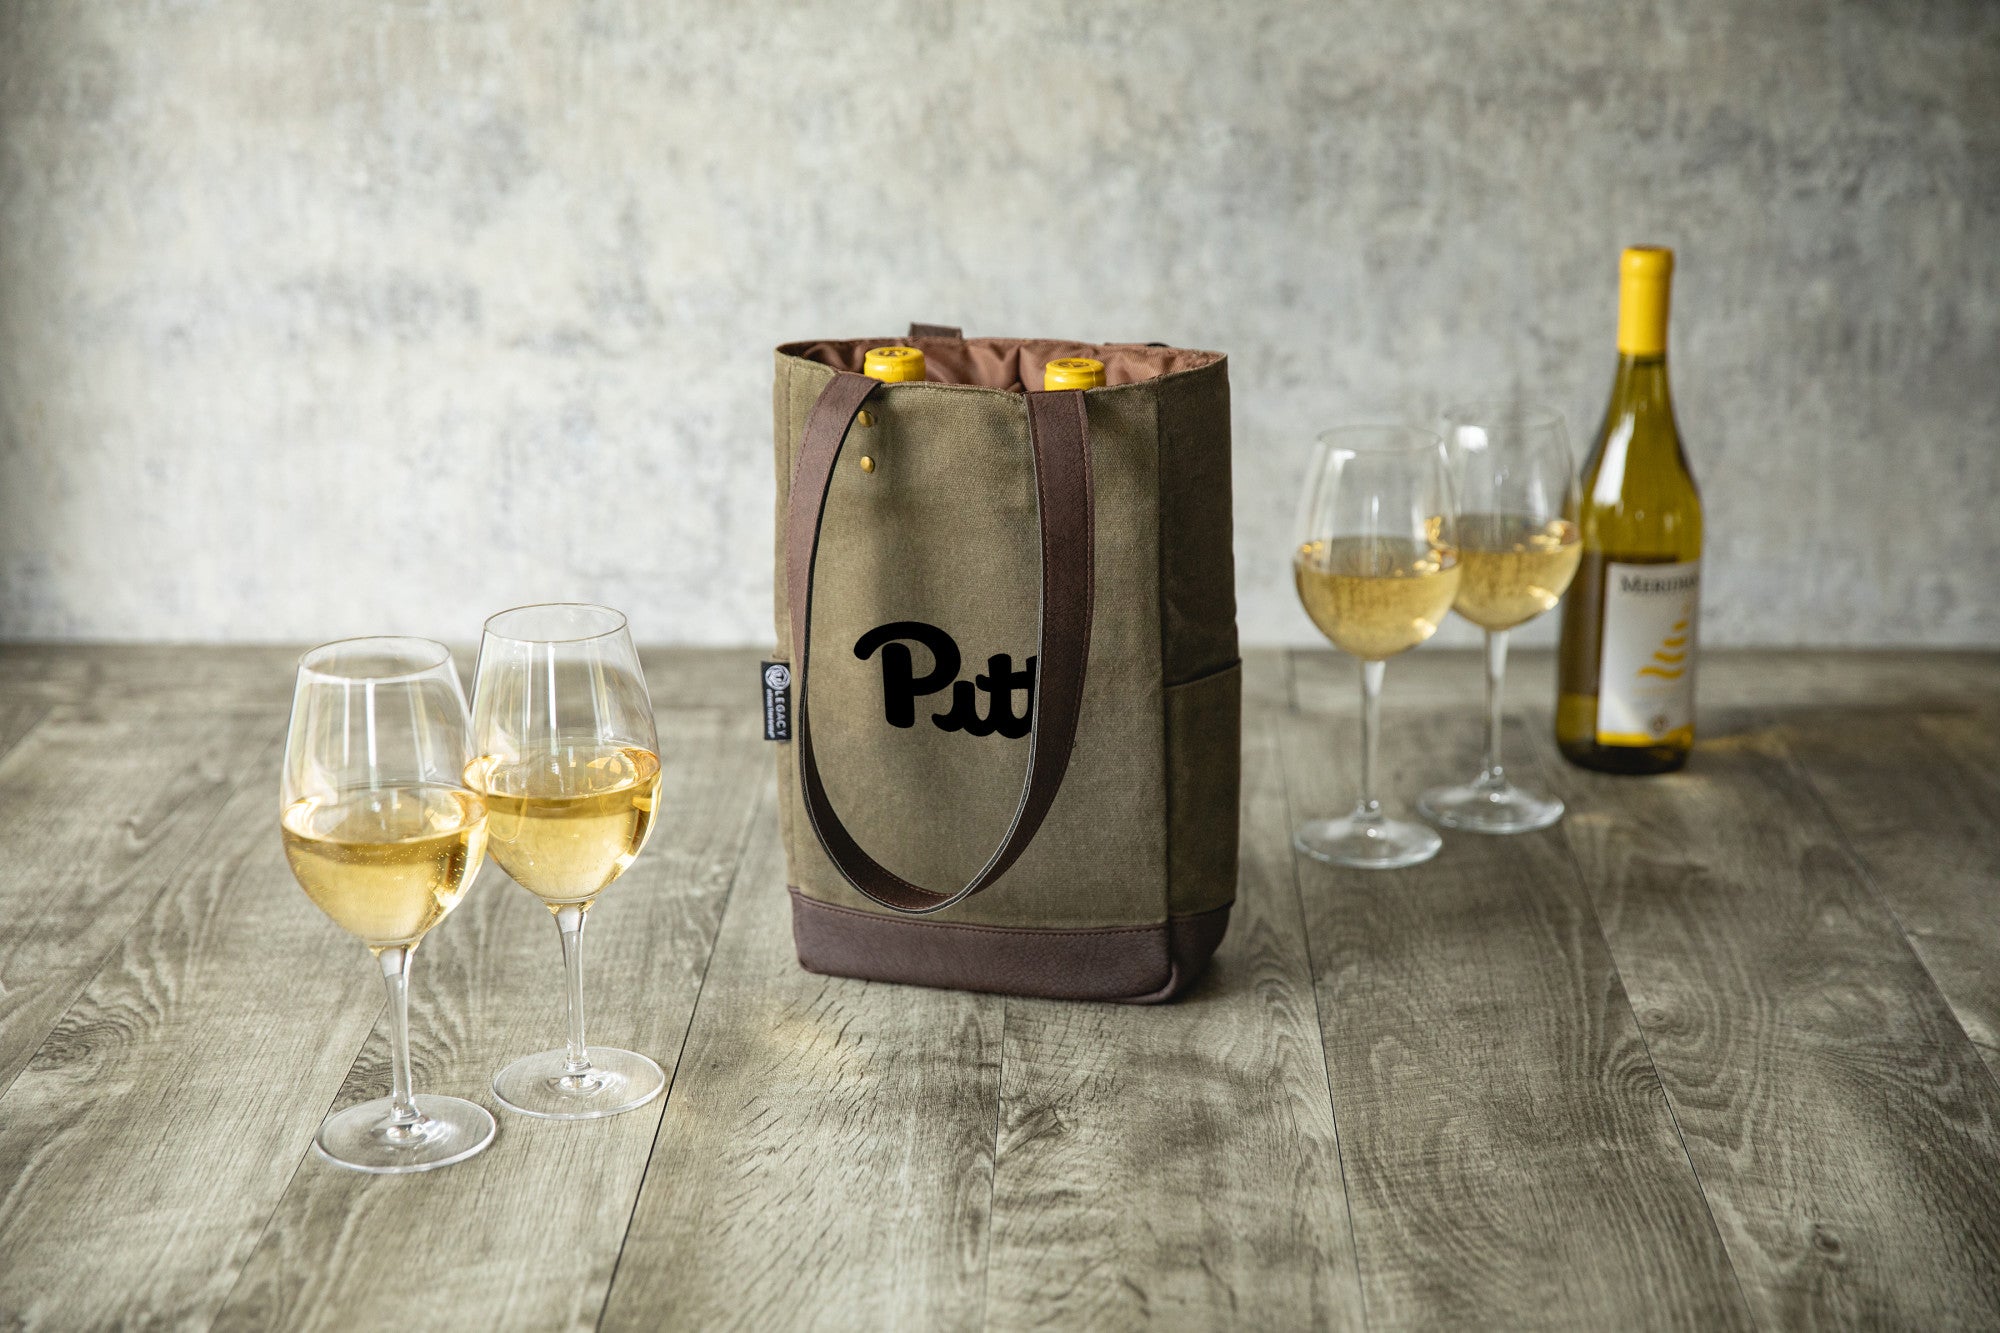 Pittsburgh Panthers - 2 Bottle Insulated Wine Cooler Bag